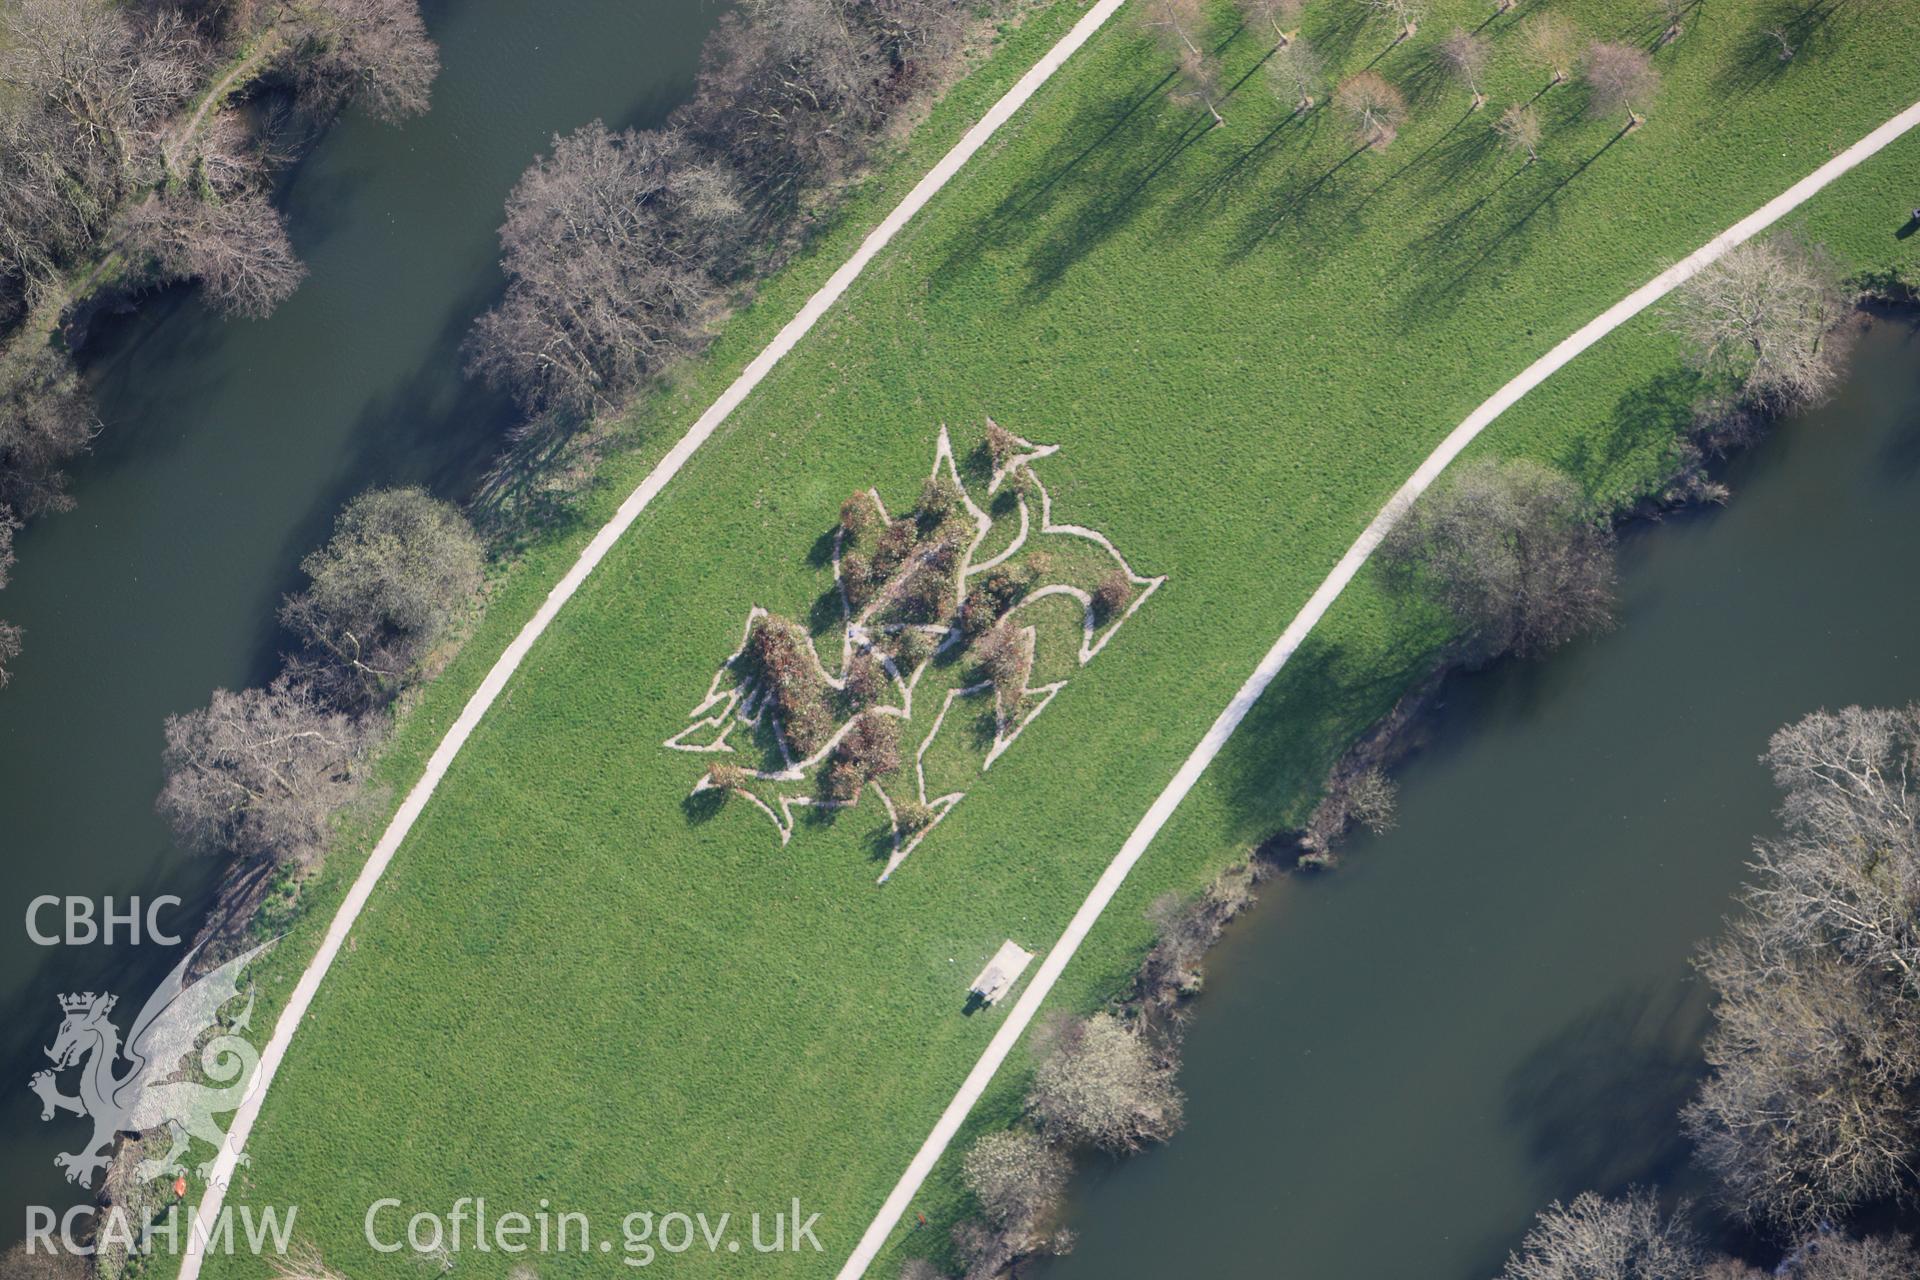 RCAHMW colour oblique aerial photograph of Newcastle Emlyn Castle, showing dragon landscape art on east side of castle. Taken on 13 April 2010 by Toby Driver